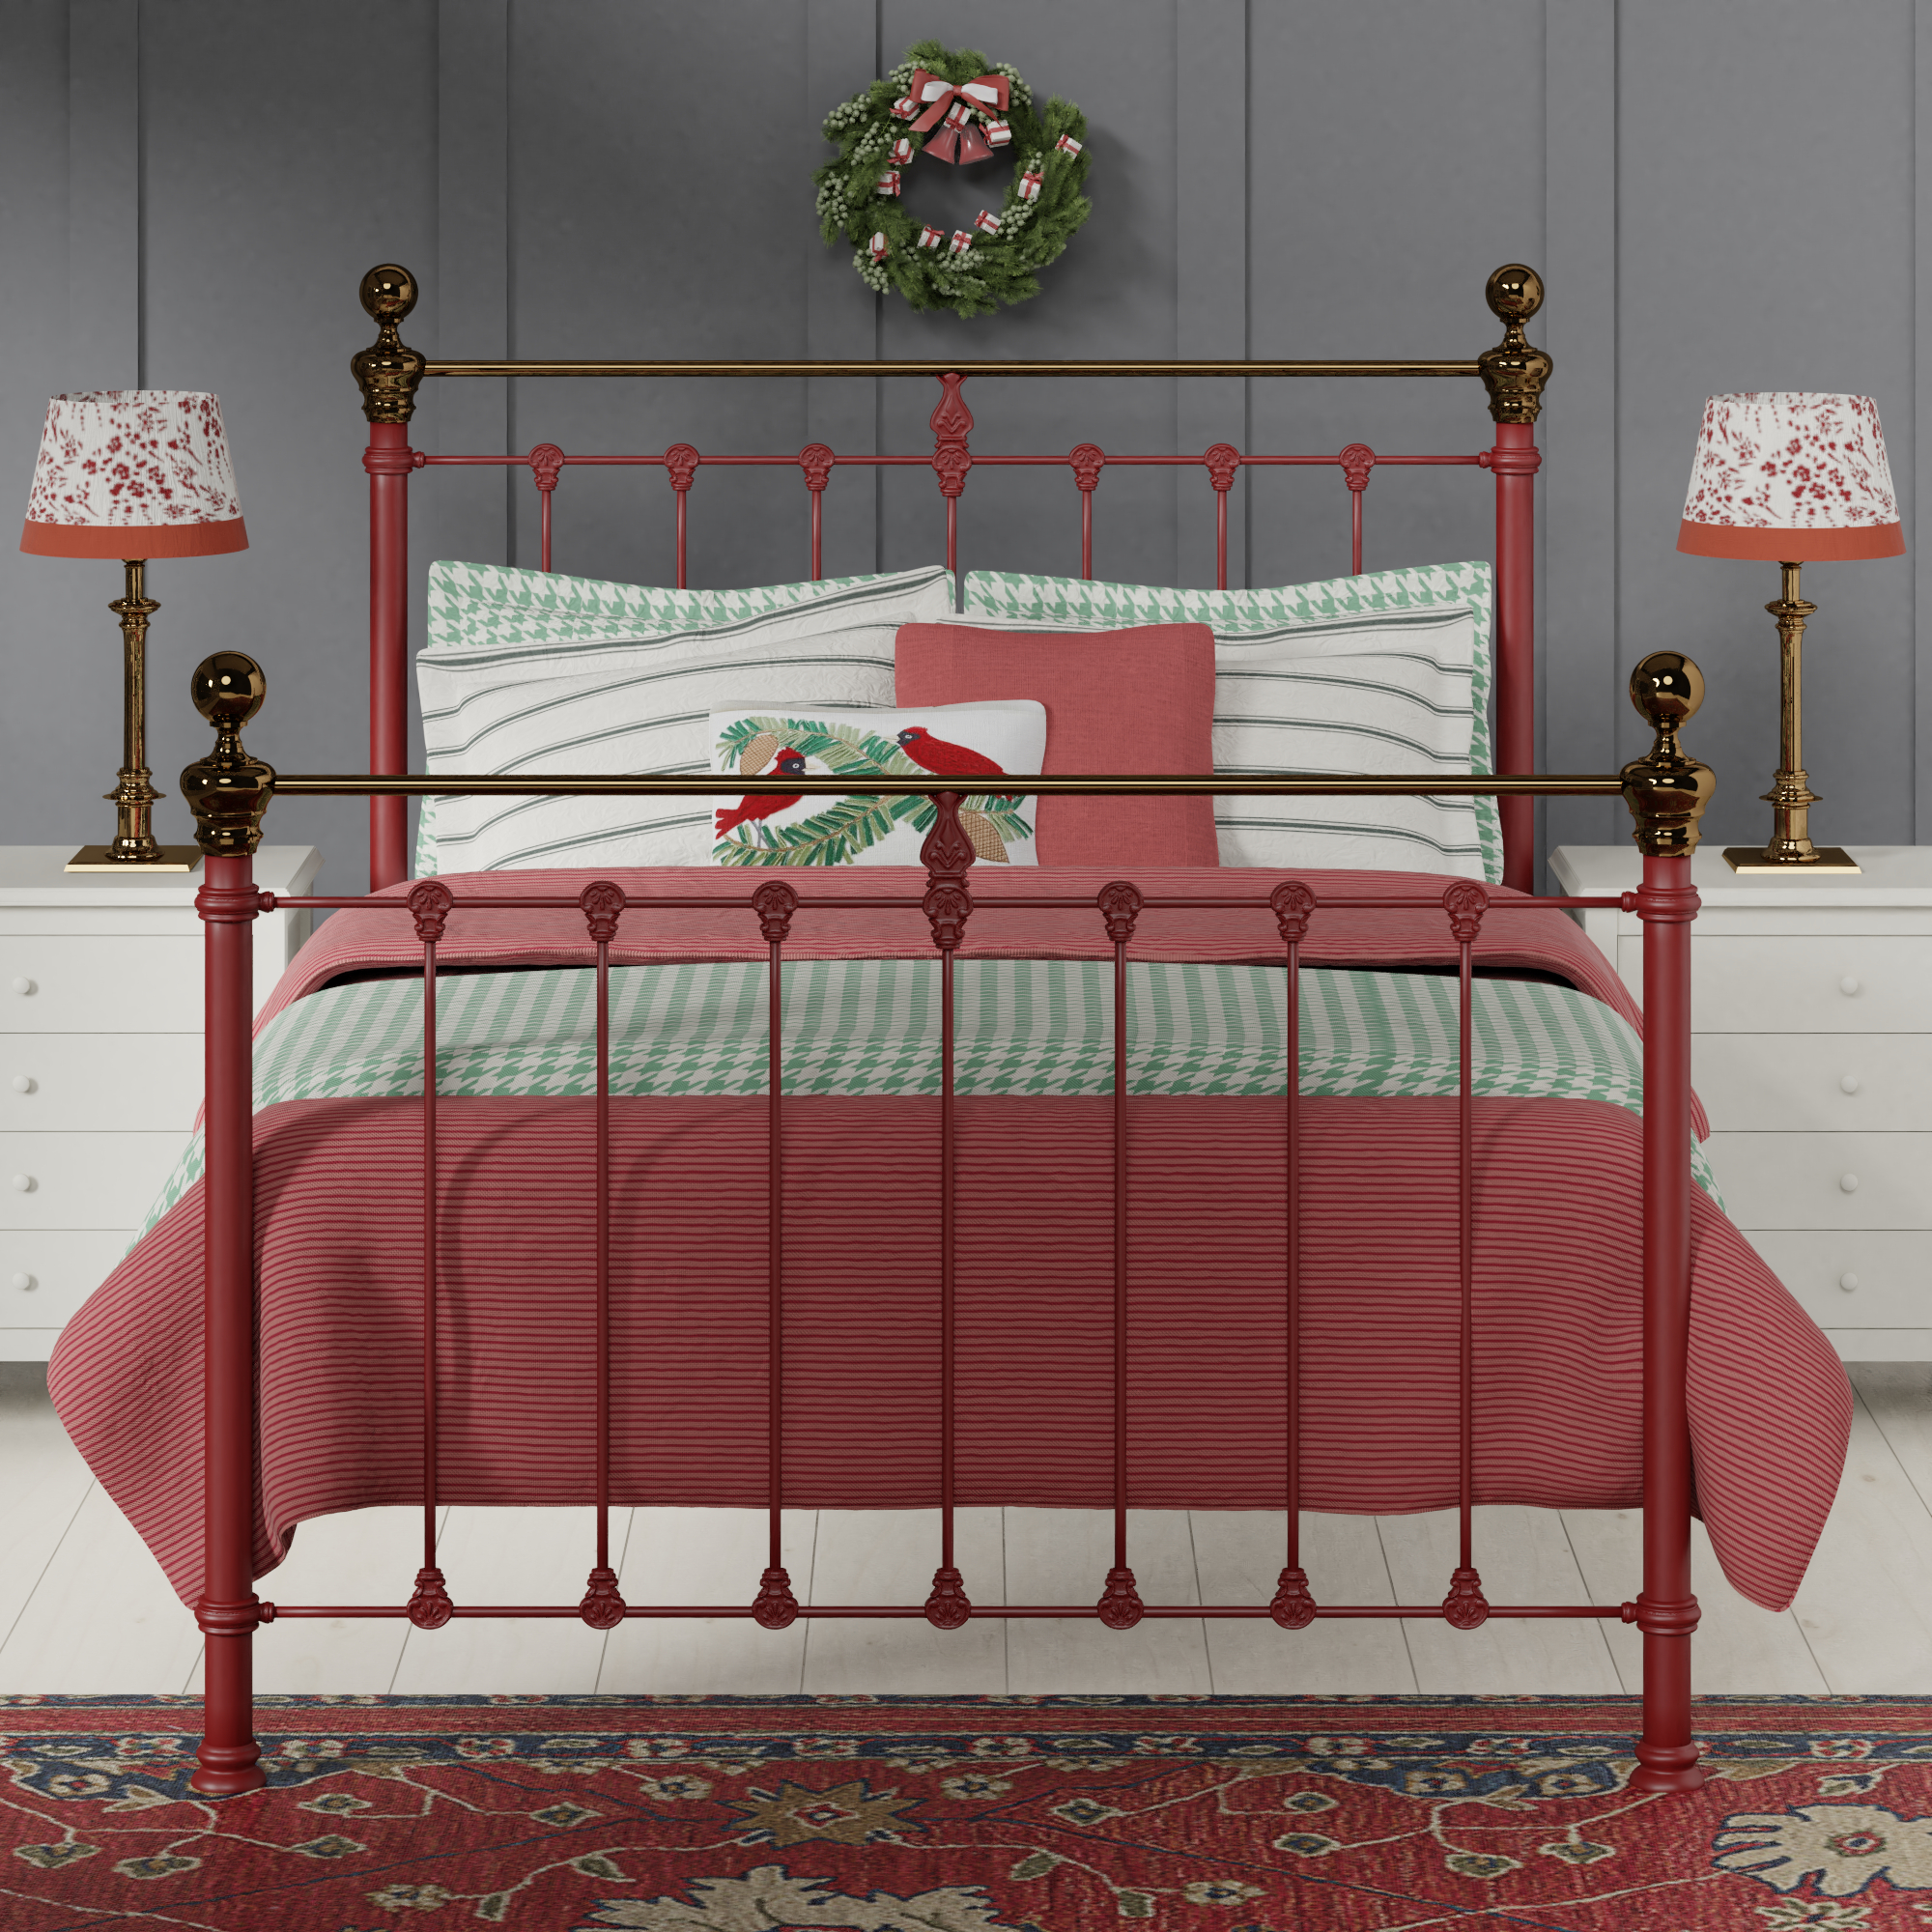 Beds & bed frames by The Original Bed Co